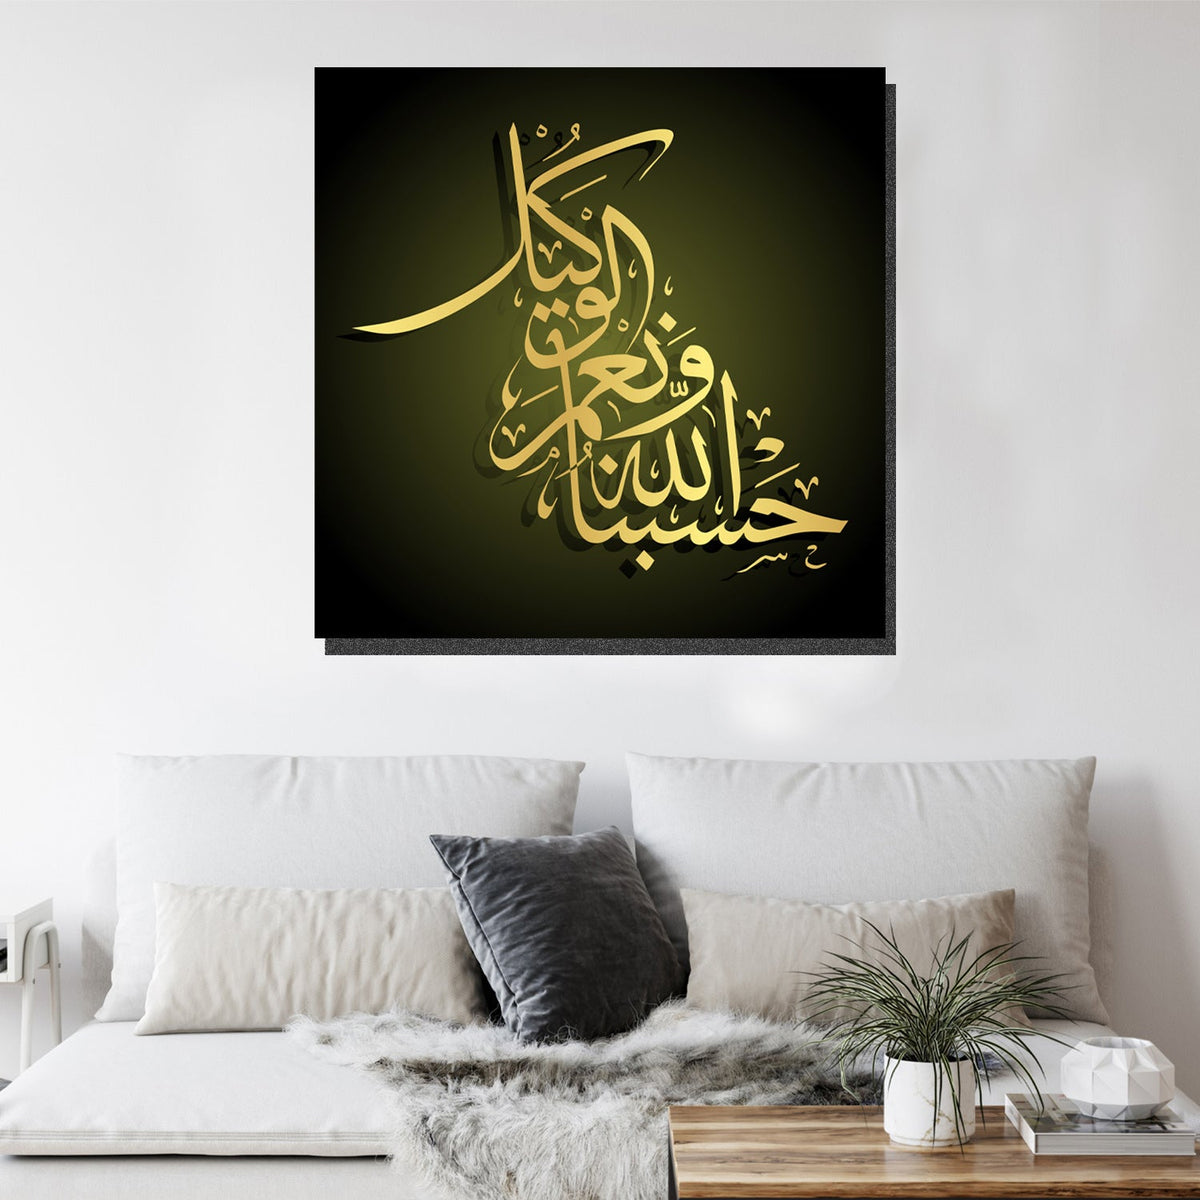 https://cdn.shopify.com/s/files/1/0387/9986/8044/products/IslamicArtLimitedEdition19CanvasArtprintStretched-4.jpg